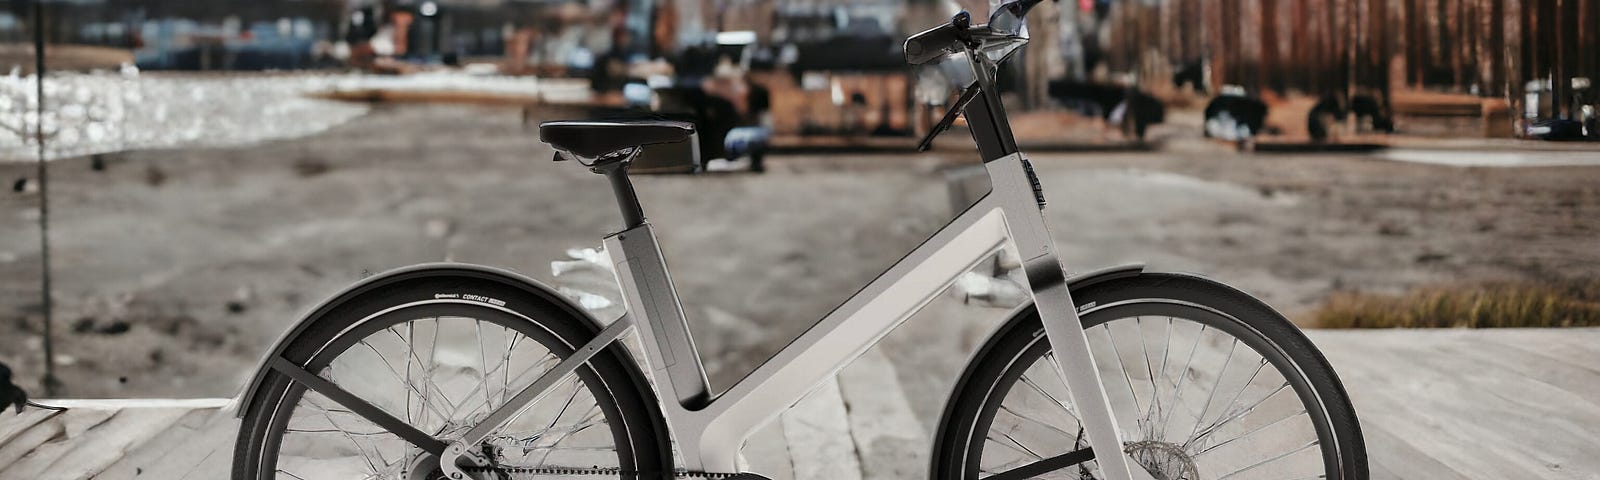 A view of the Anod Tribrid Electric Bike on display in an urban setting.